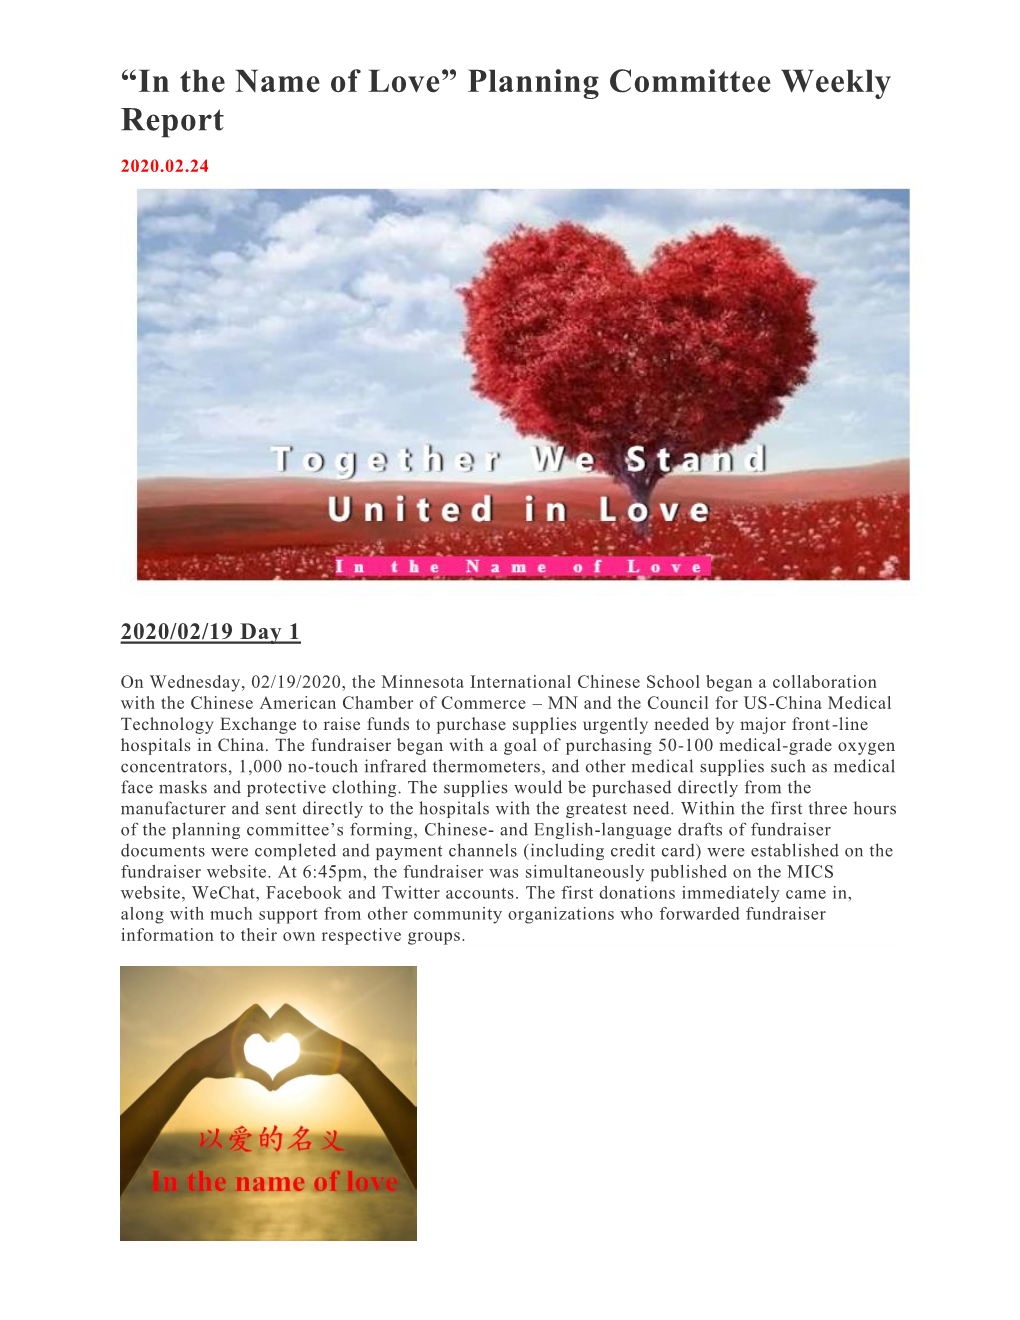 “In the Name of Love” Planning Committee Weekly Report